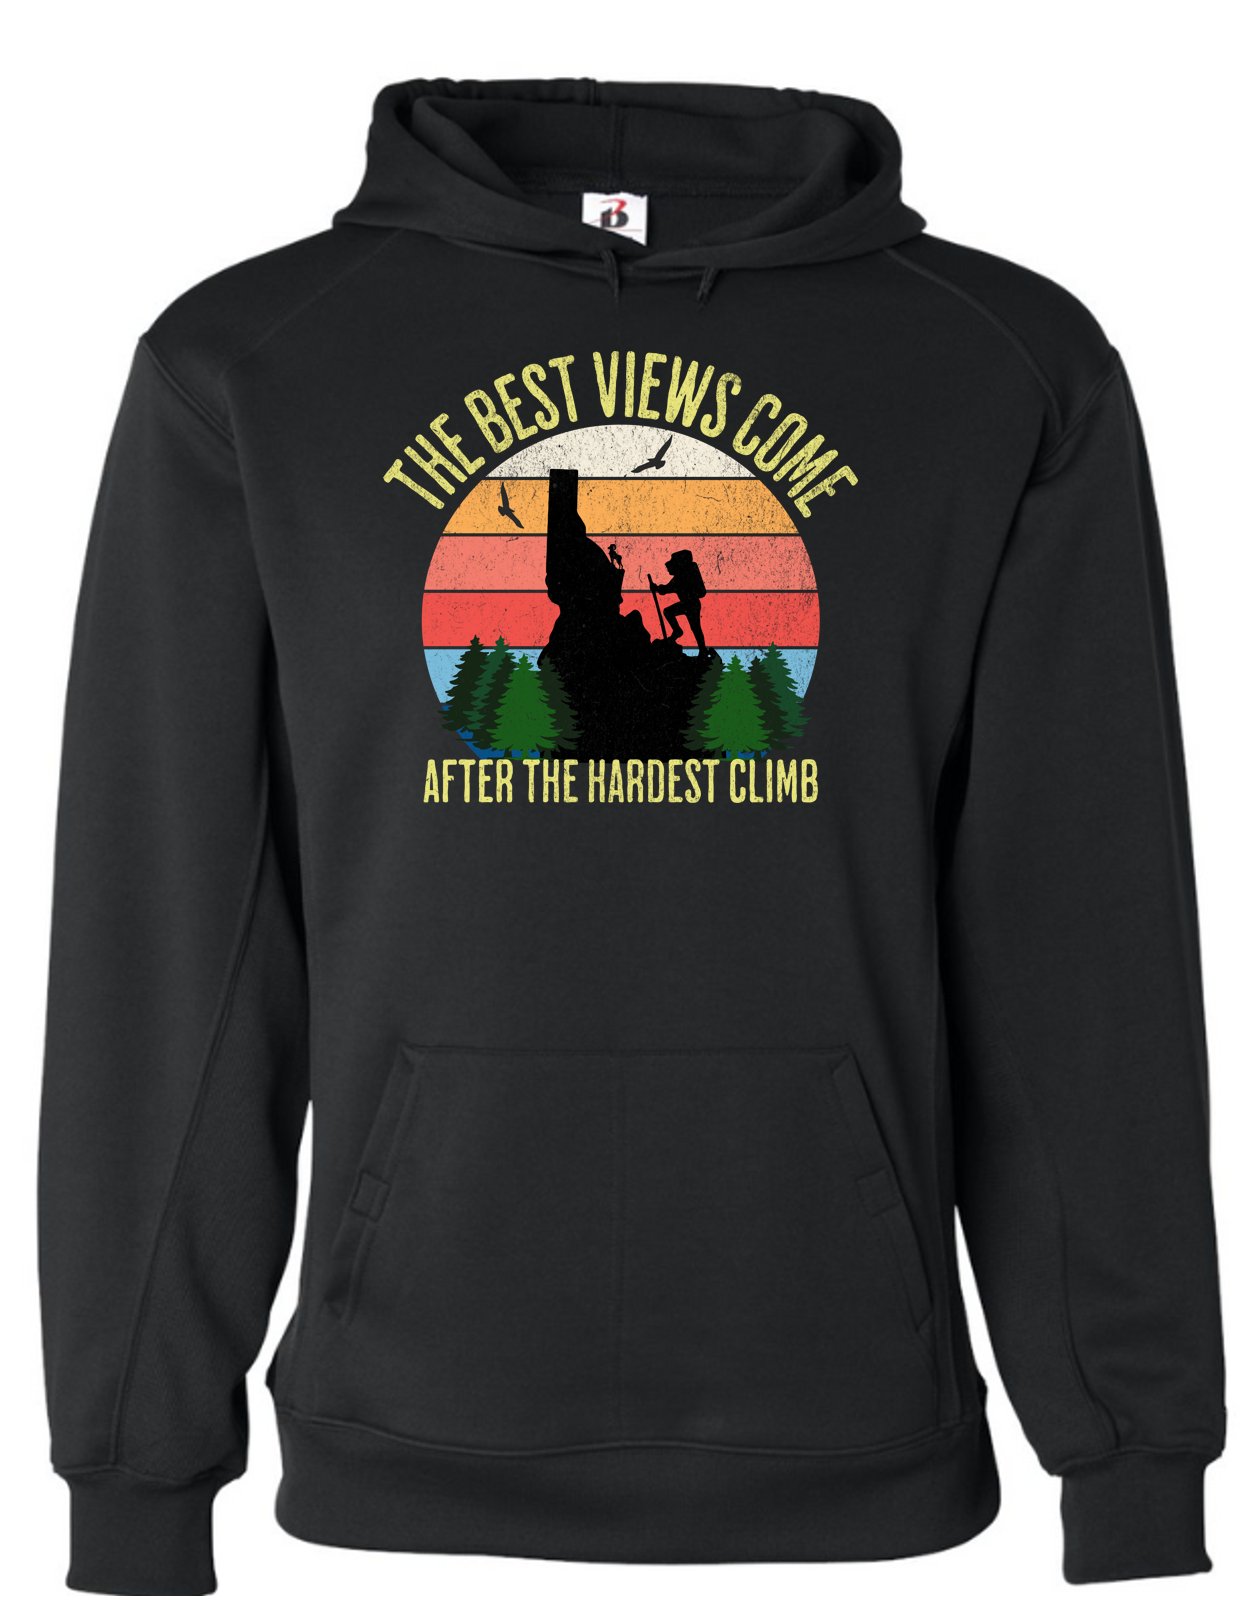 The Best Views Come After The Hardest Climb Hoodie -